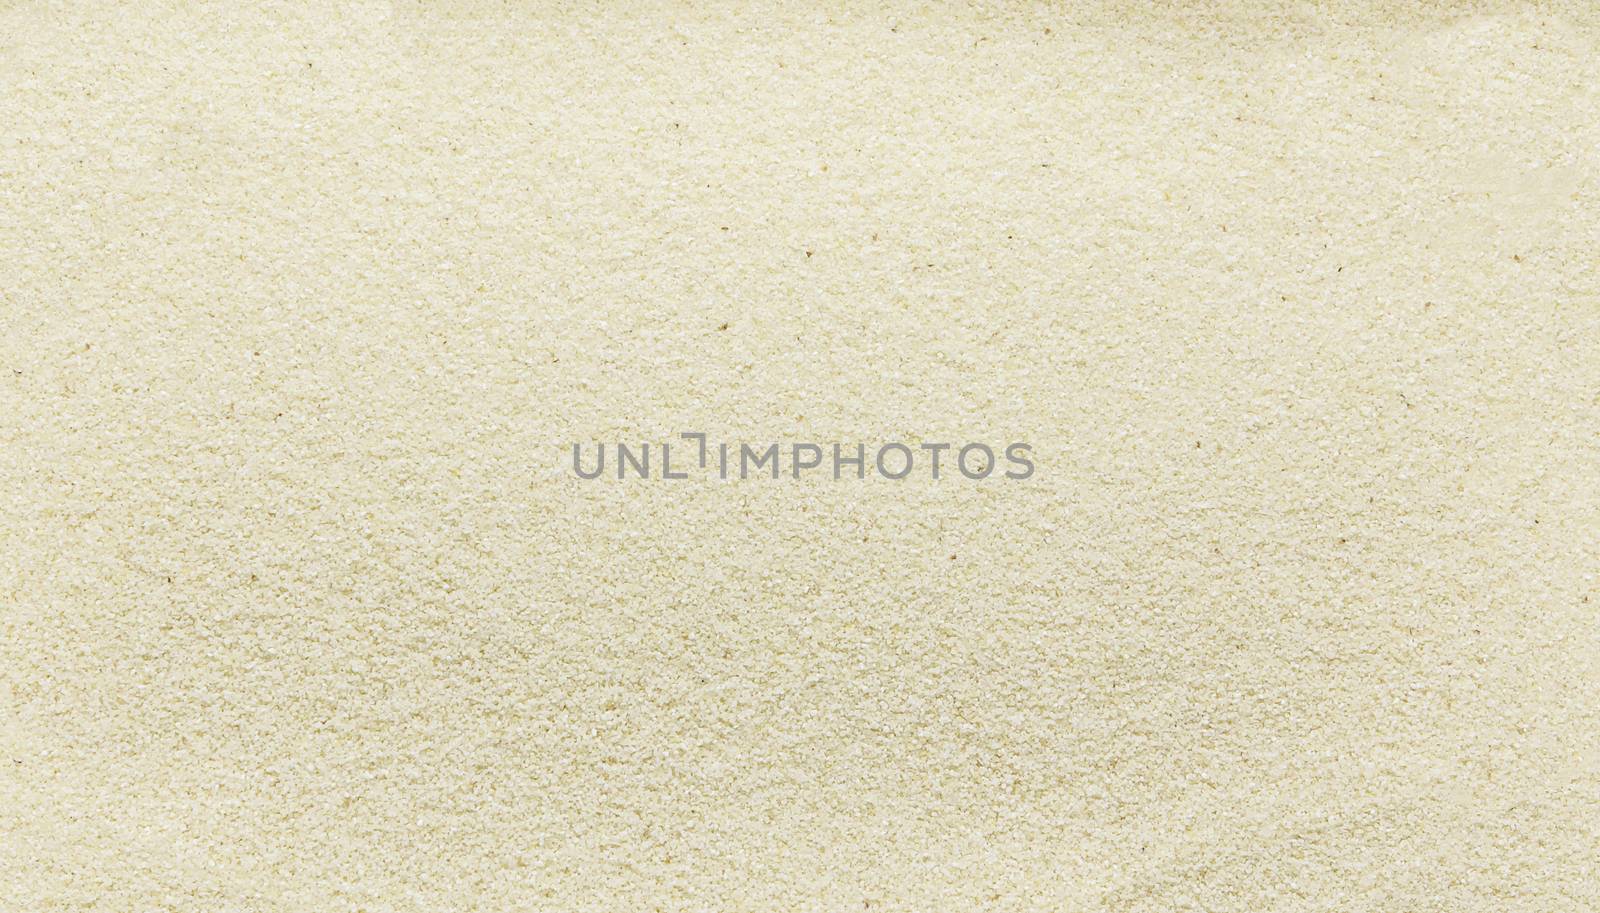 Raw semolina - traditional food - texture and detail, top view, close up